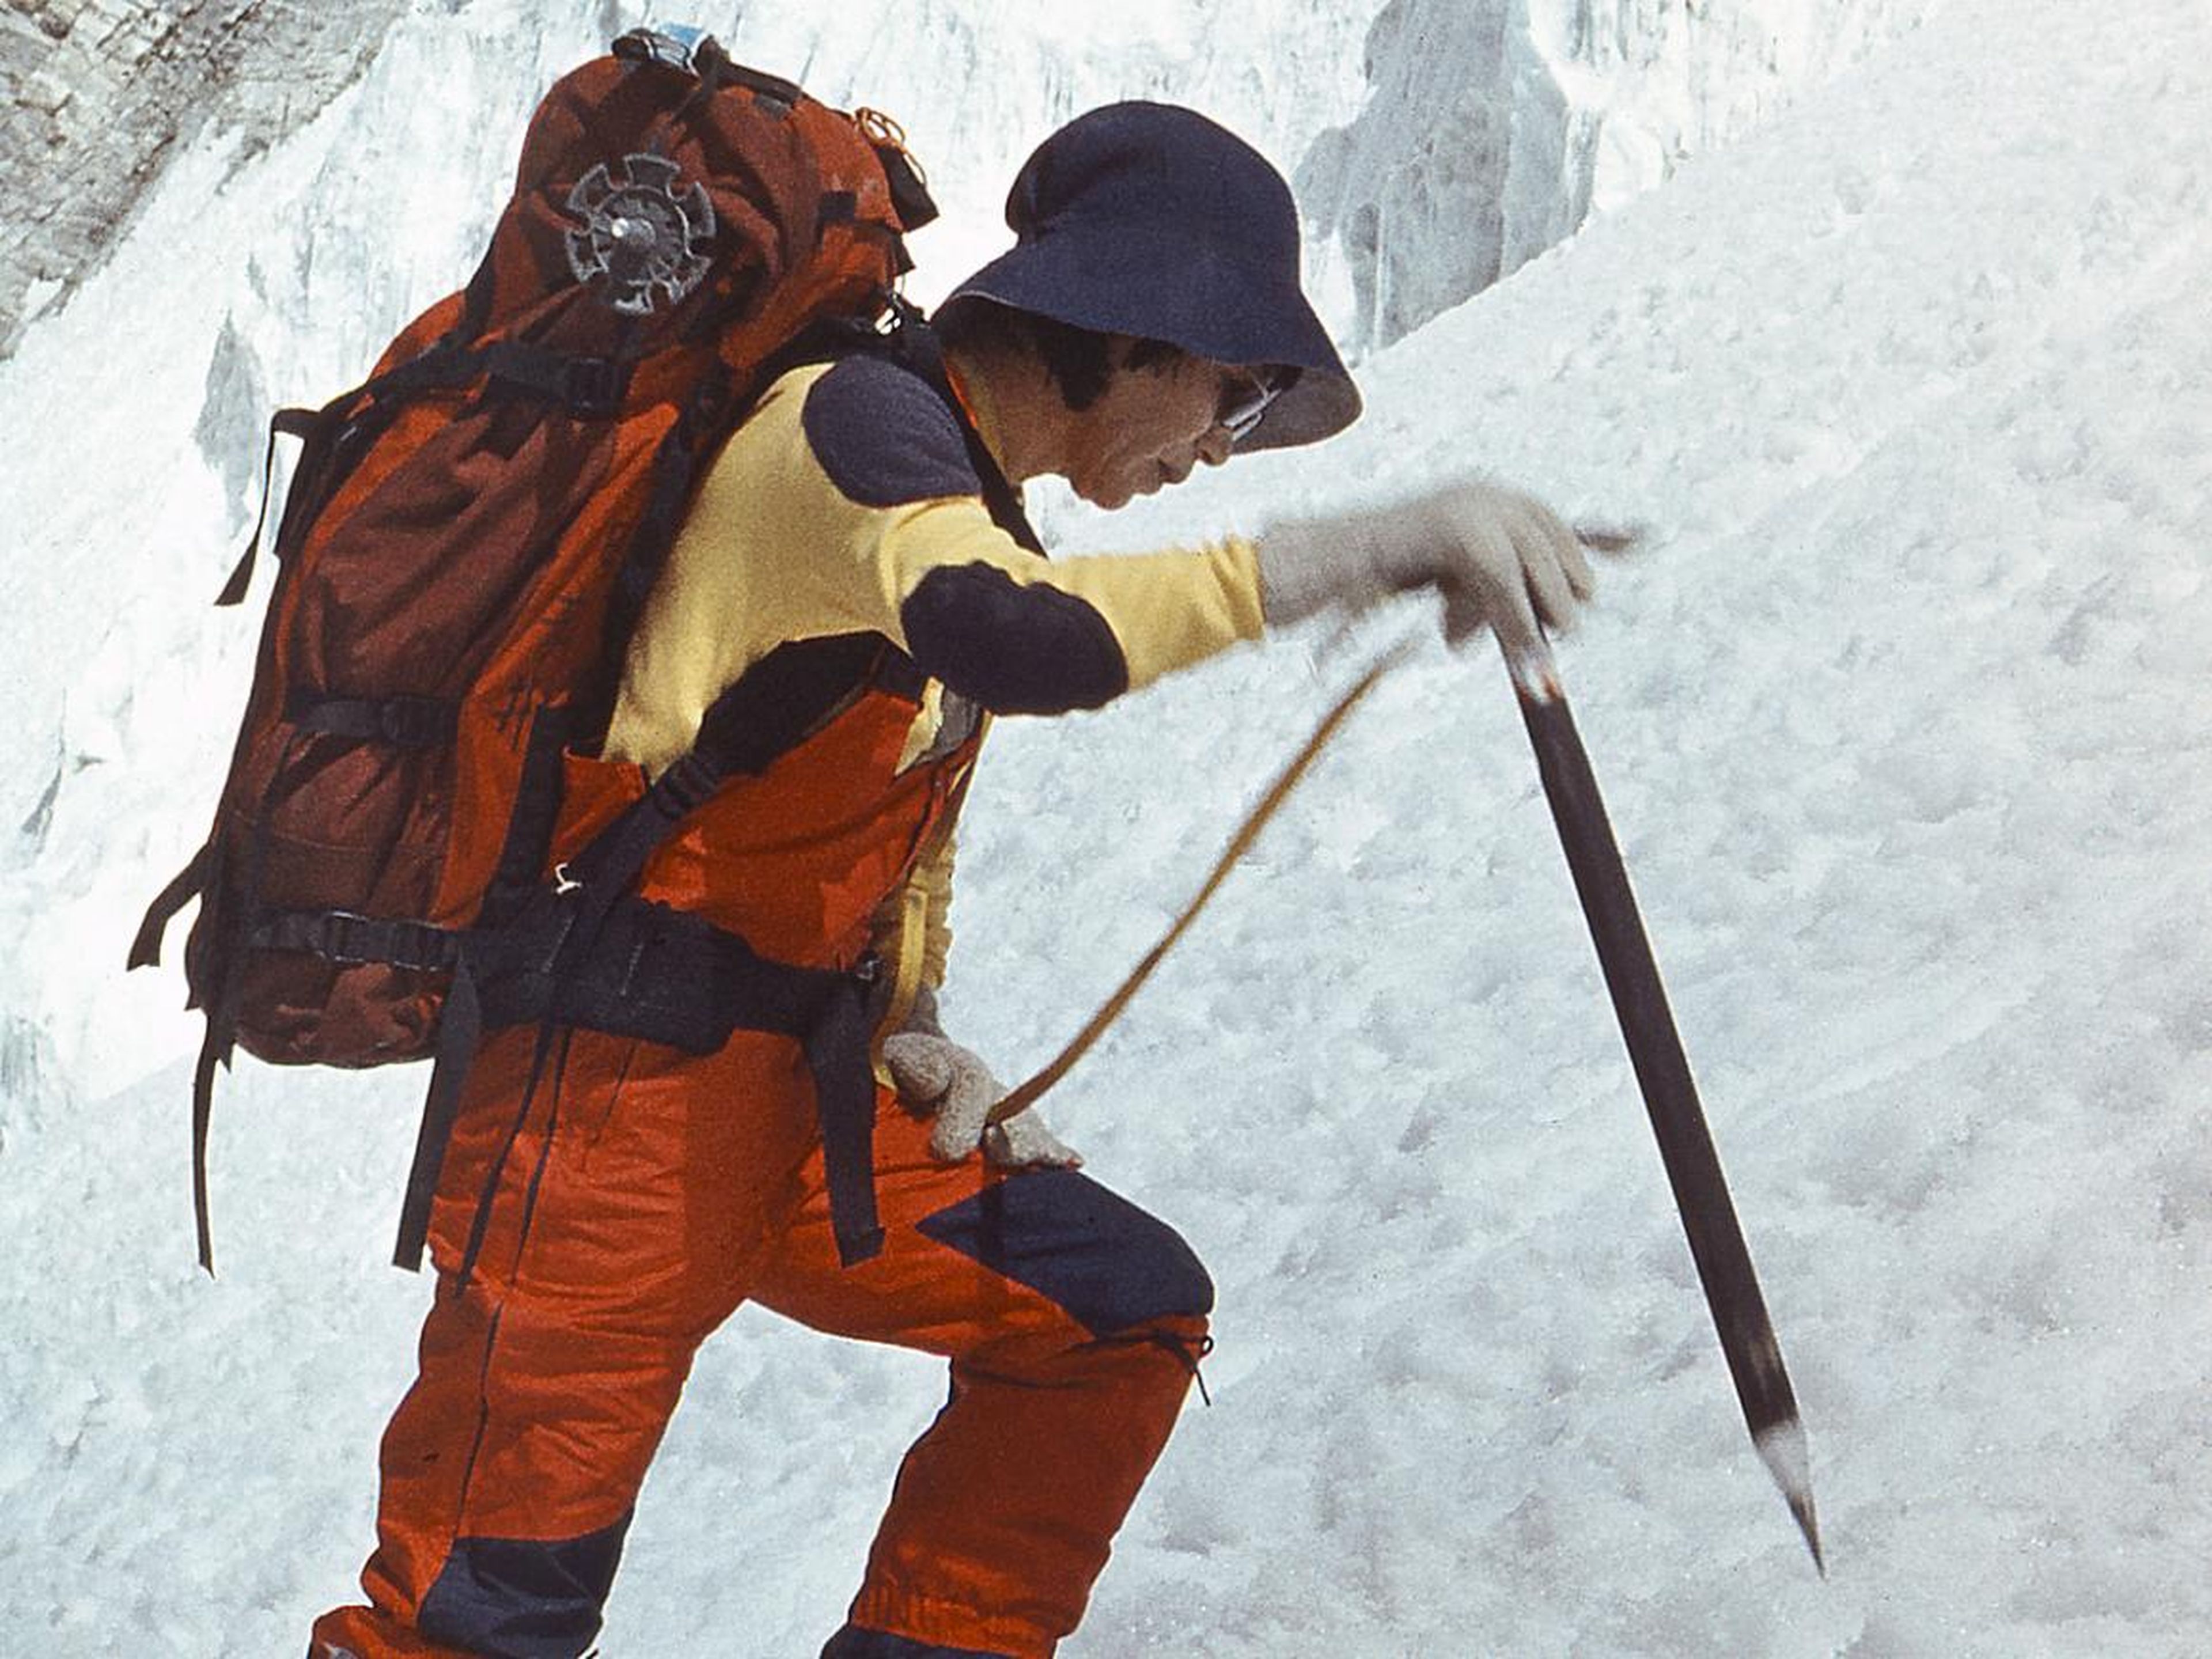 Junko Tabei reached the summit of Mount Everest in 1970, becoming the first woman to ever do so.